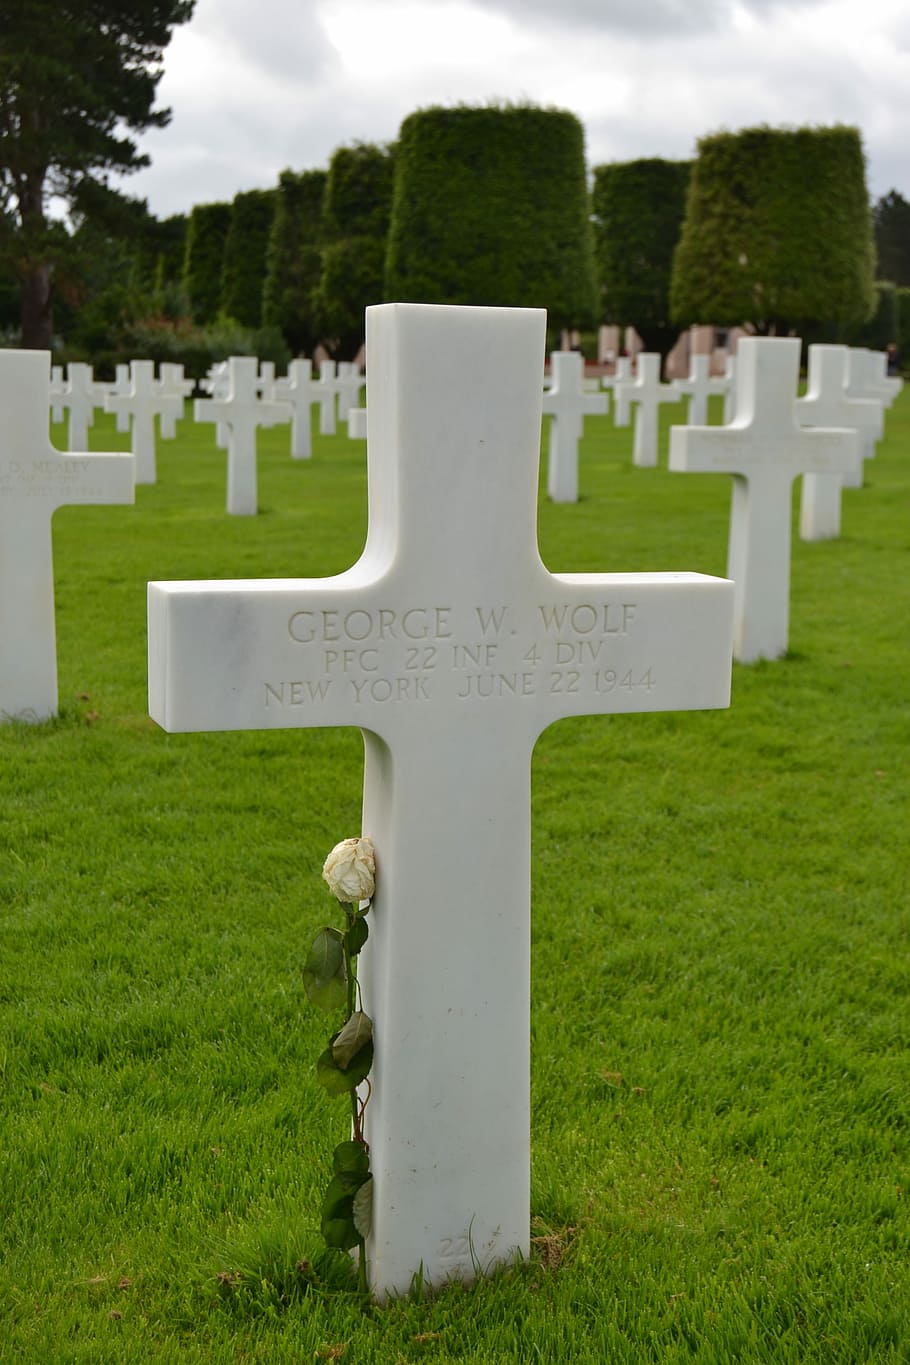 Hd Wallpaper Cemetery Normandy Normandy American Cemetery World War Tombstone Wallpaper Flare